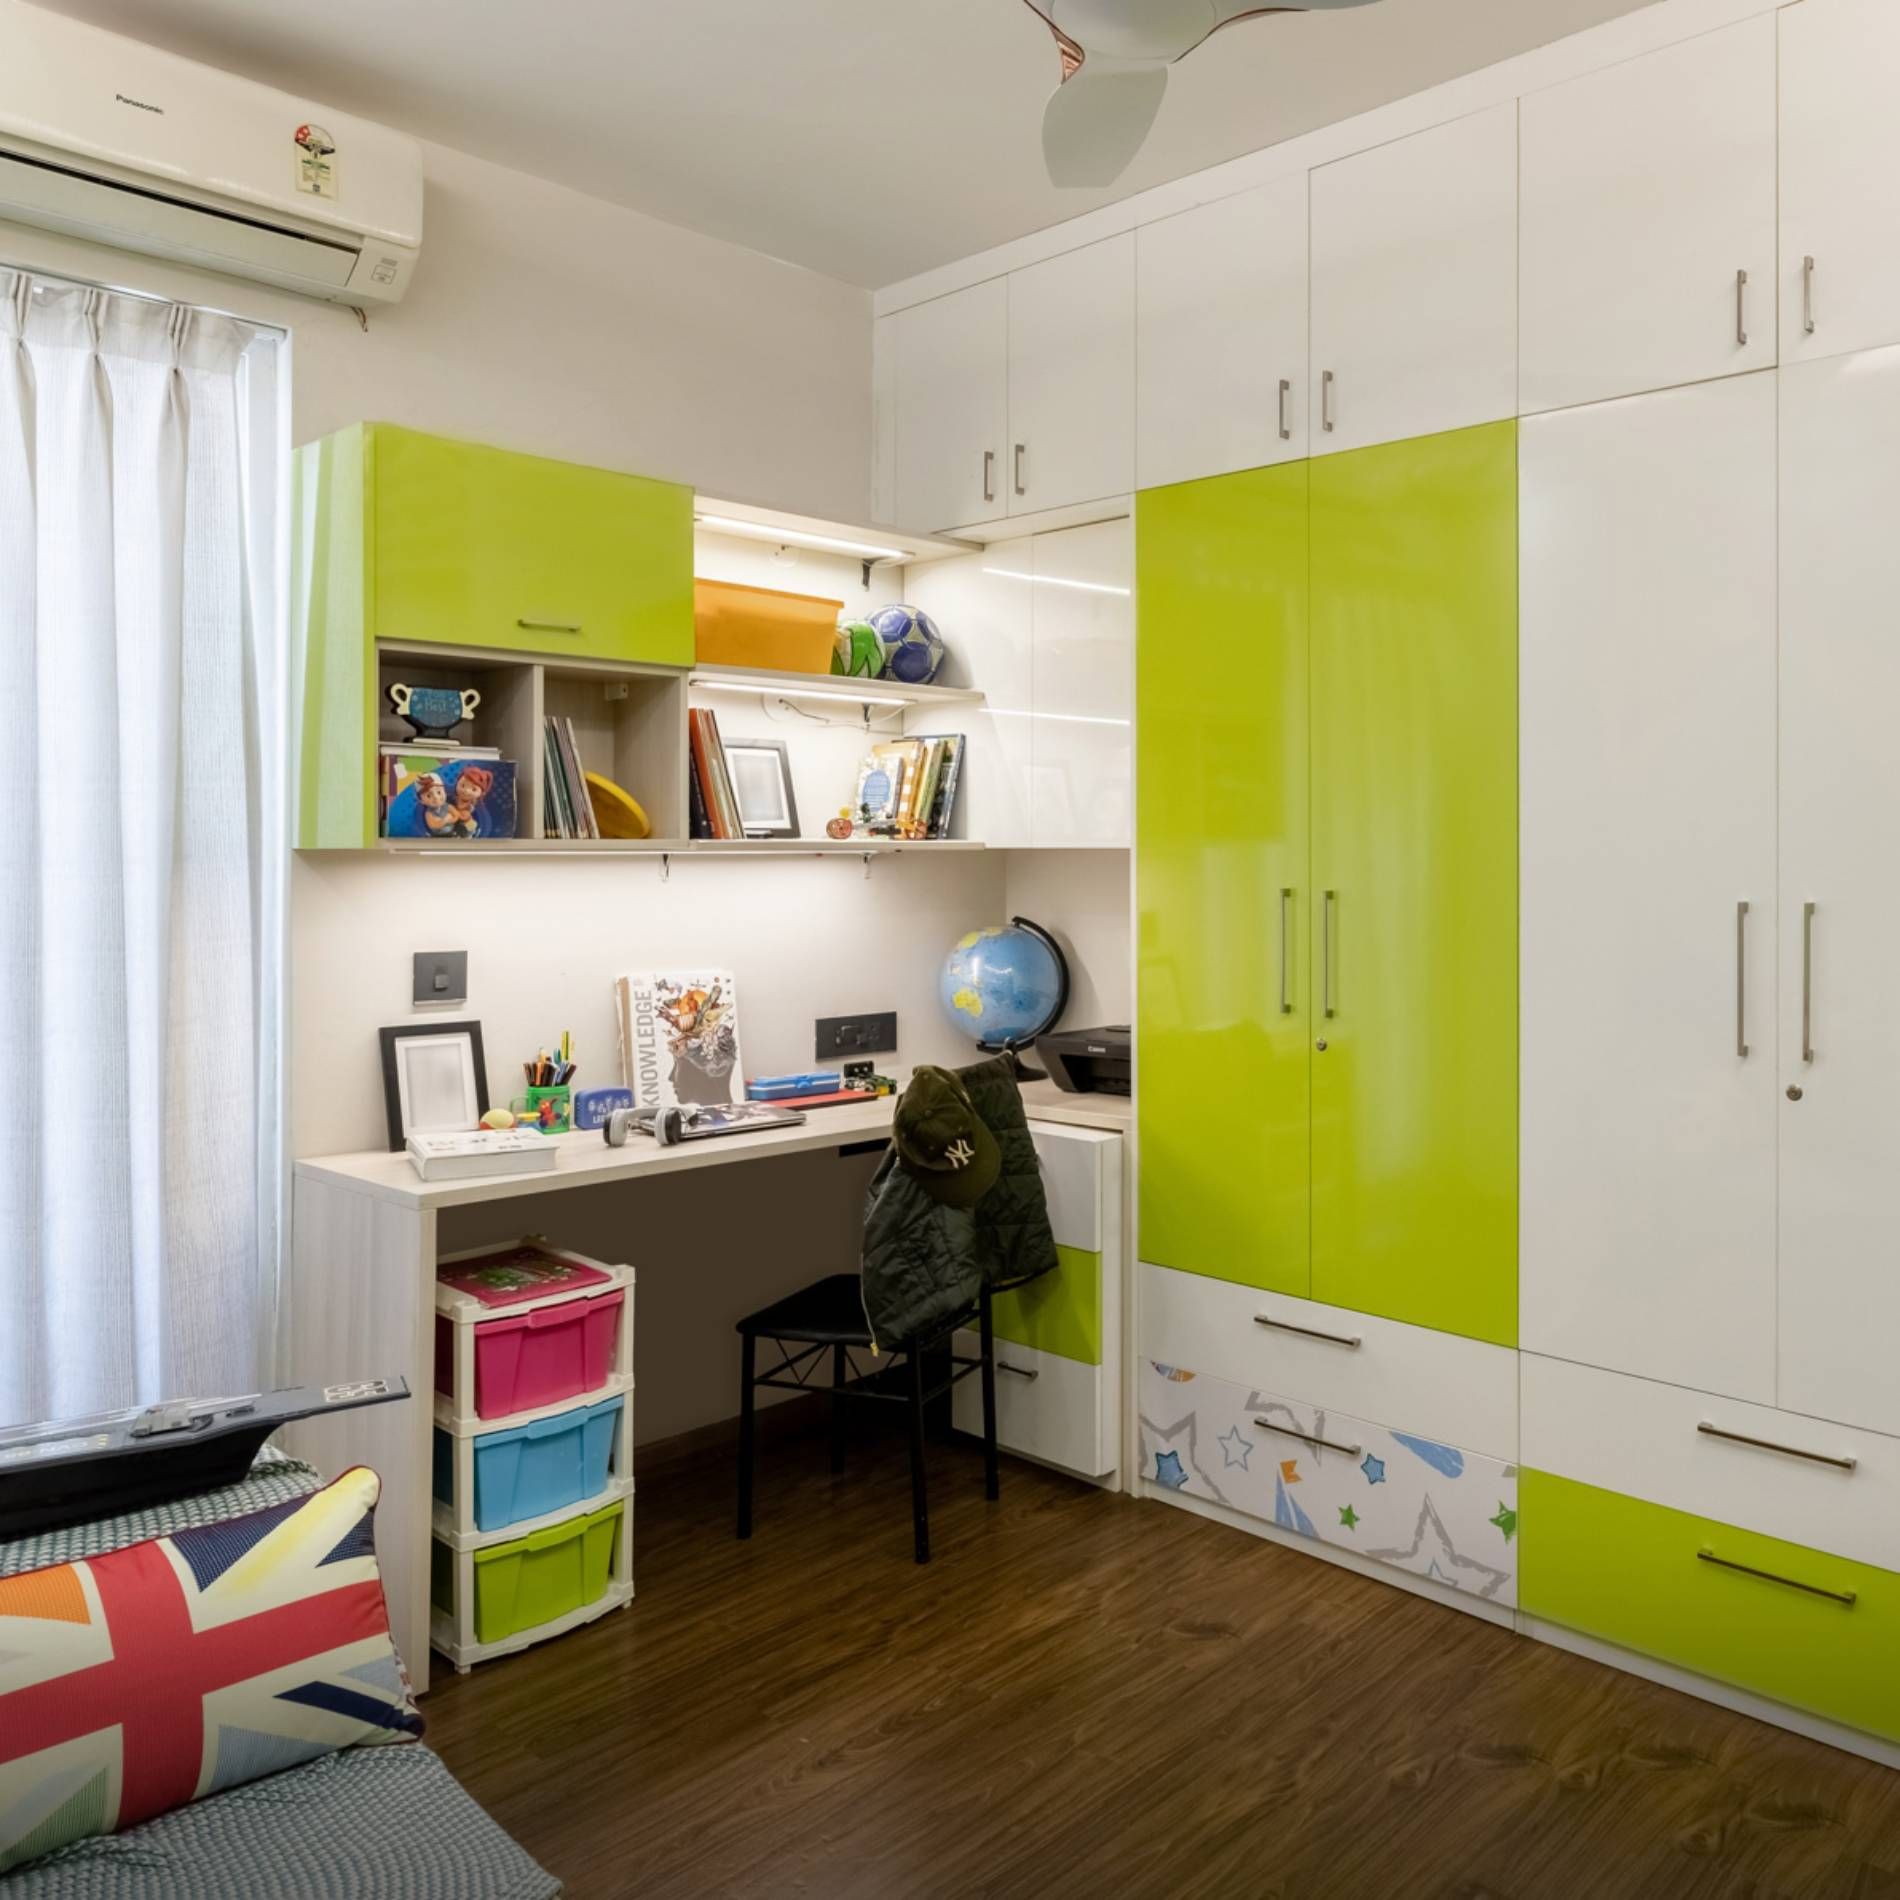 Modern Study Room Design For Kids With Lime And White Wardrobe